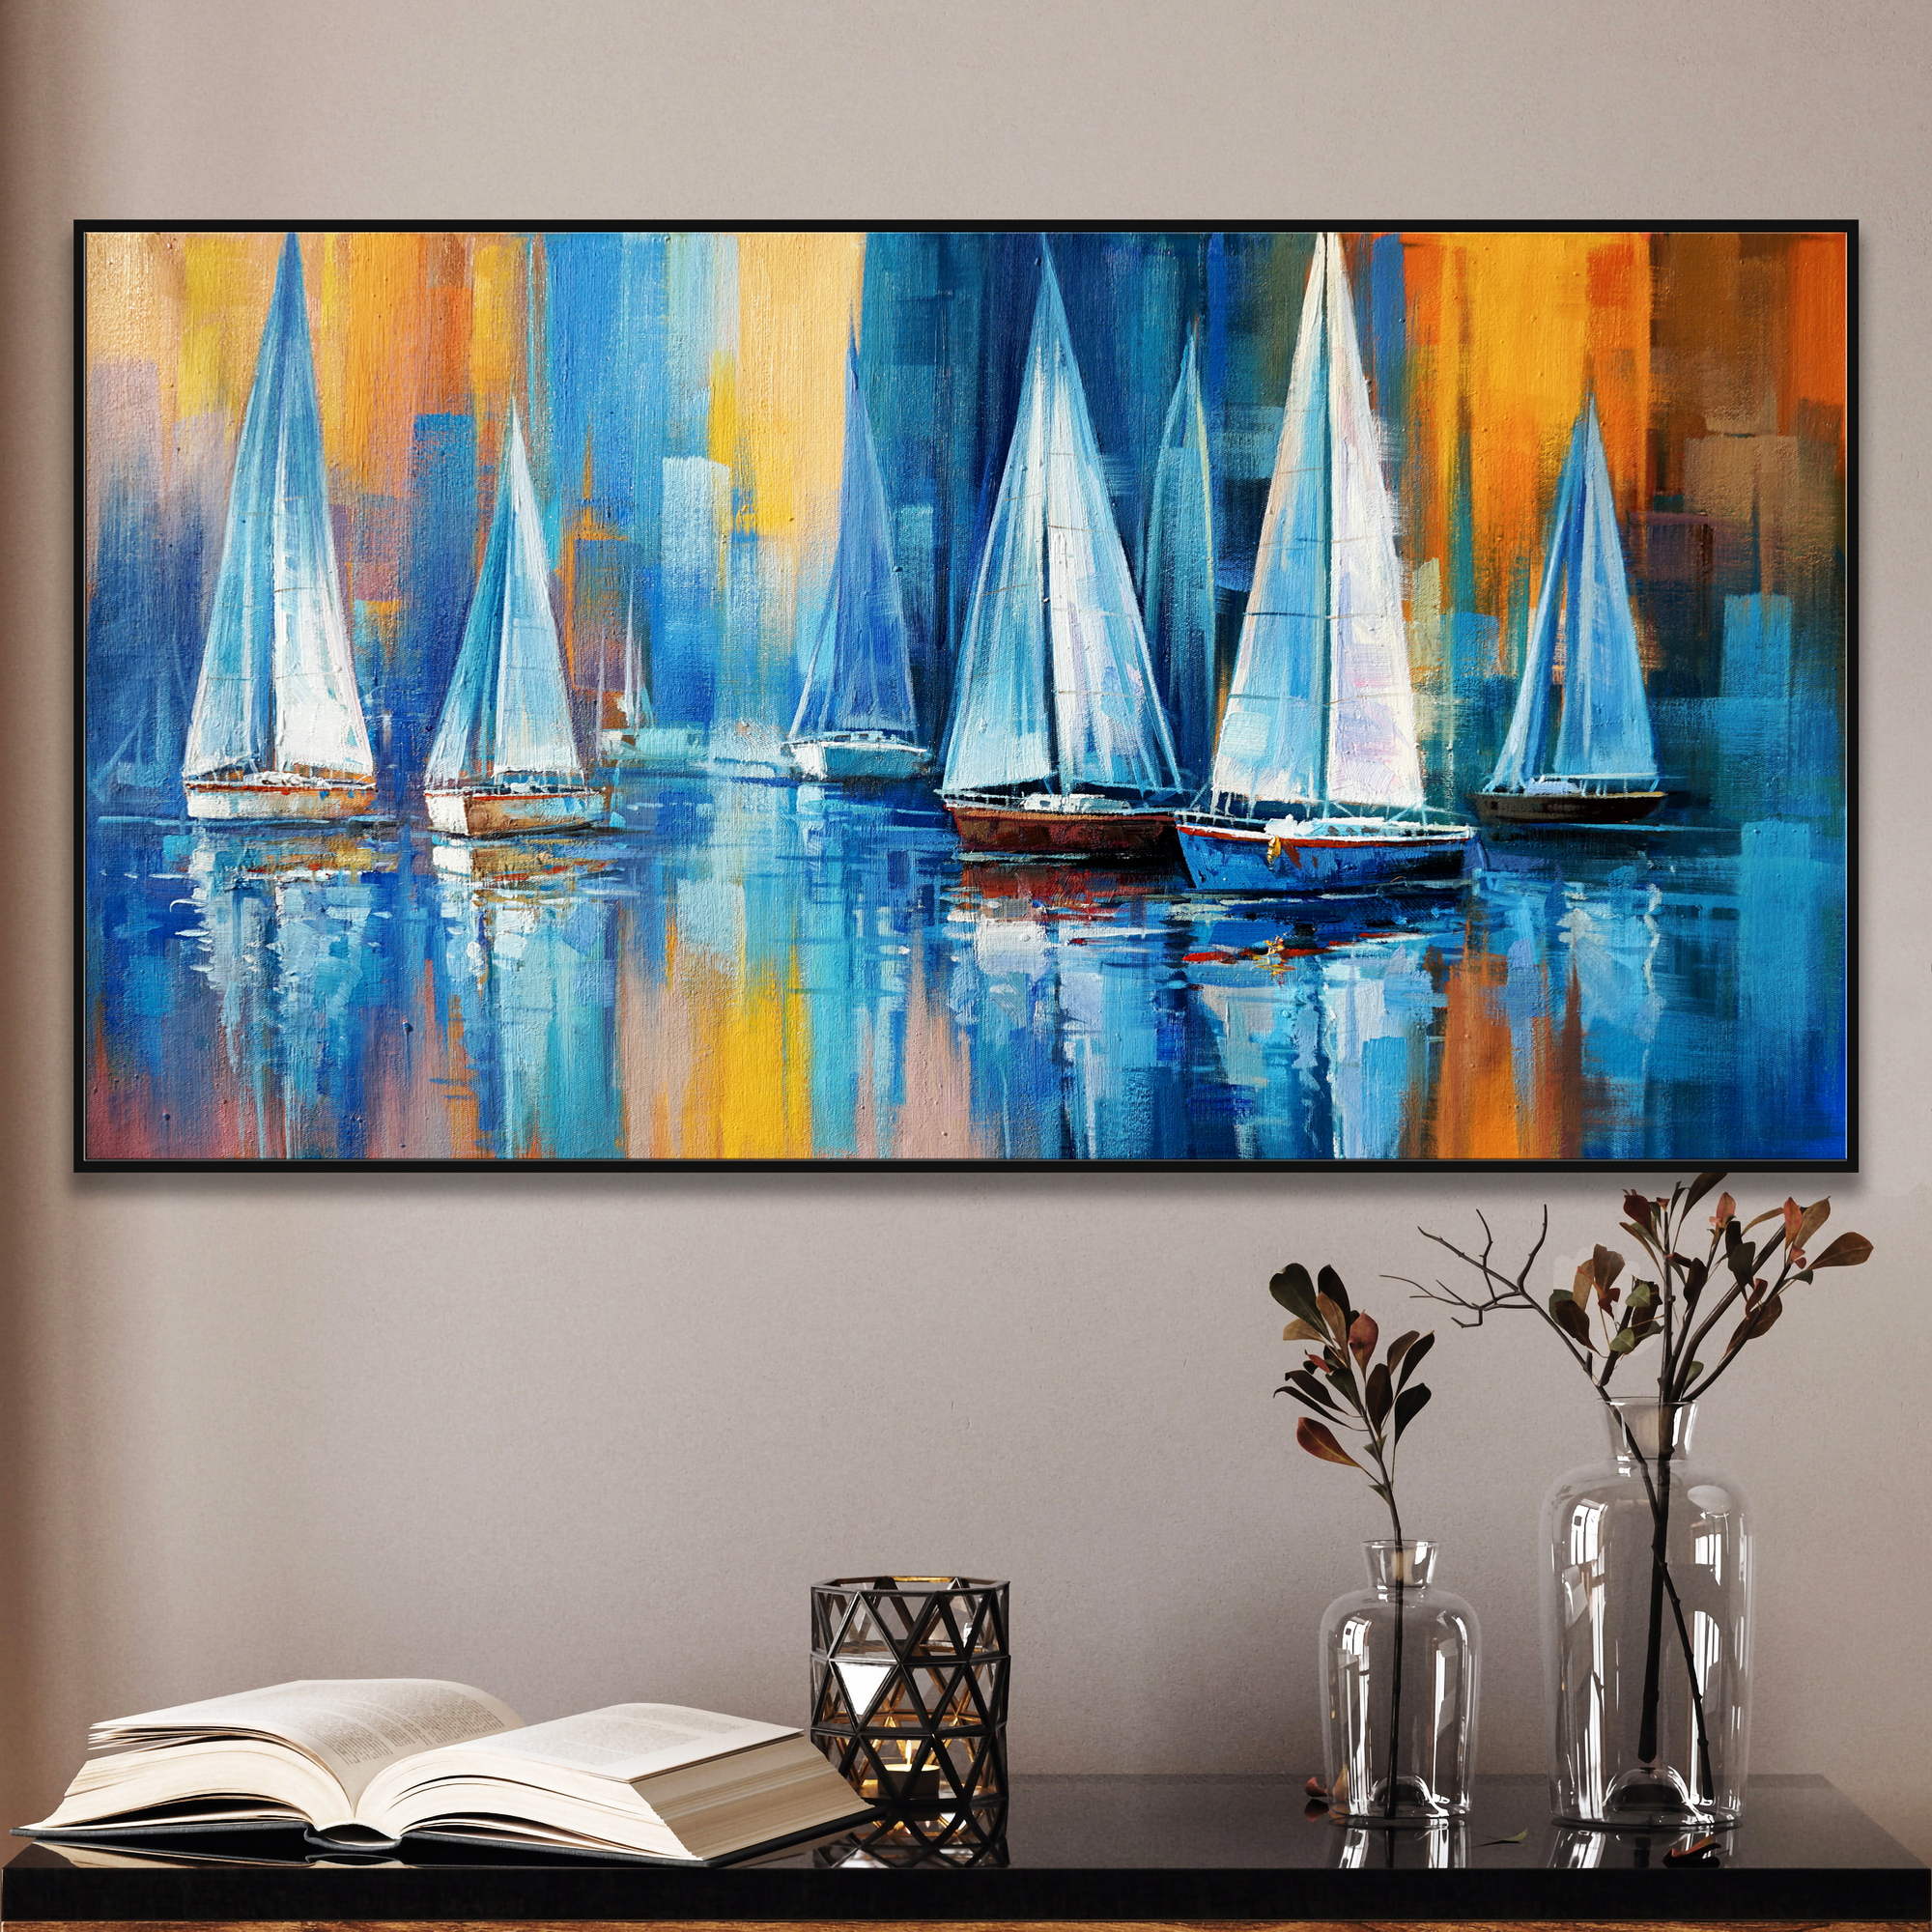 Abstract painting Sails at Sunset 60x120cm